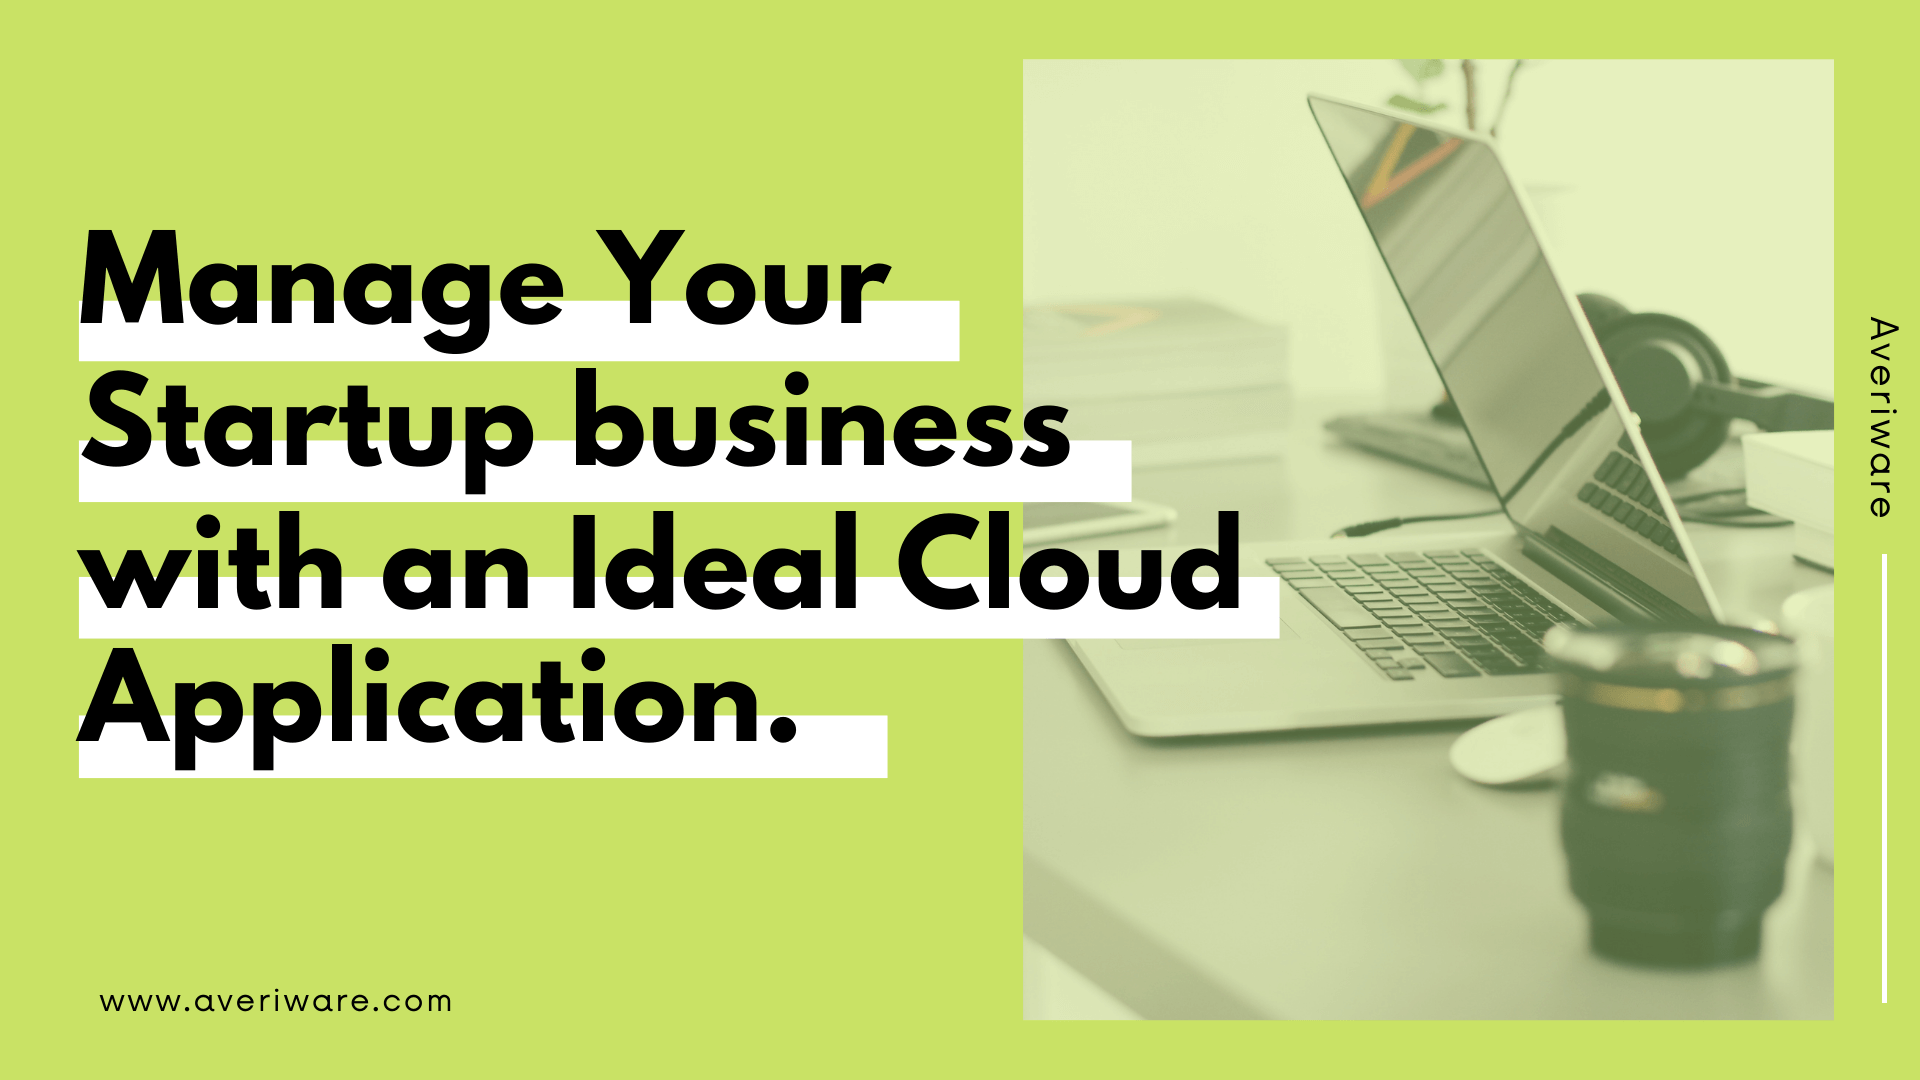 Manage Your Startup business with an Ideal Cloud Application. (1)